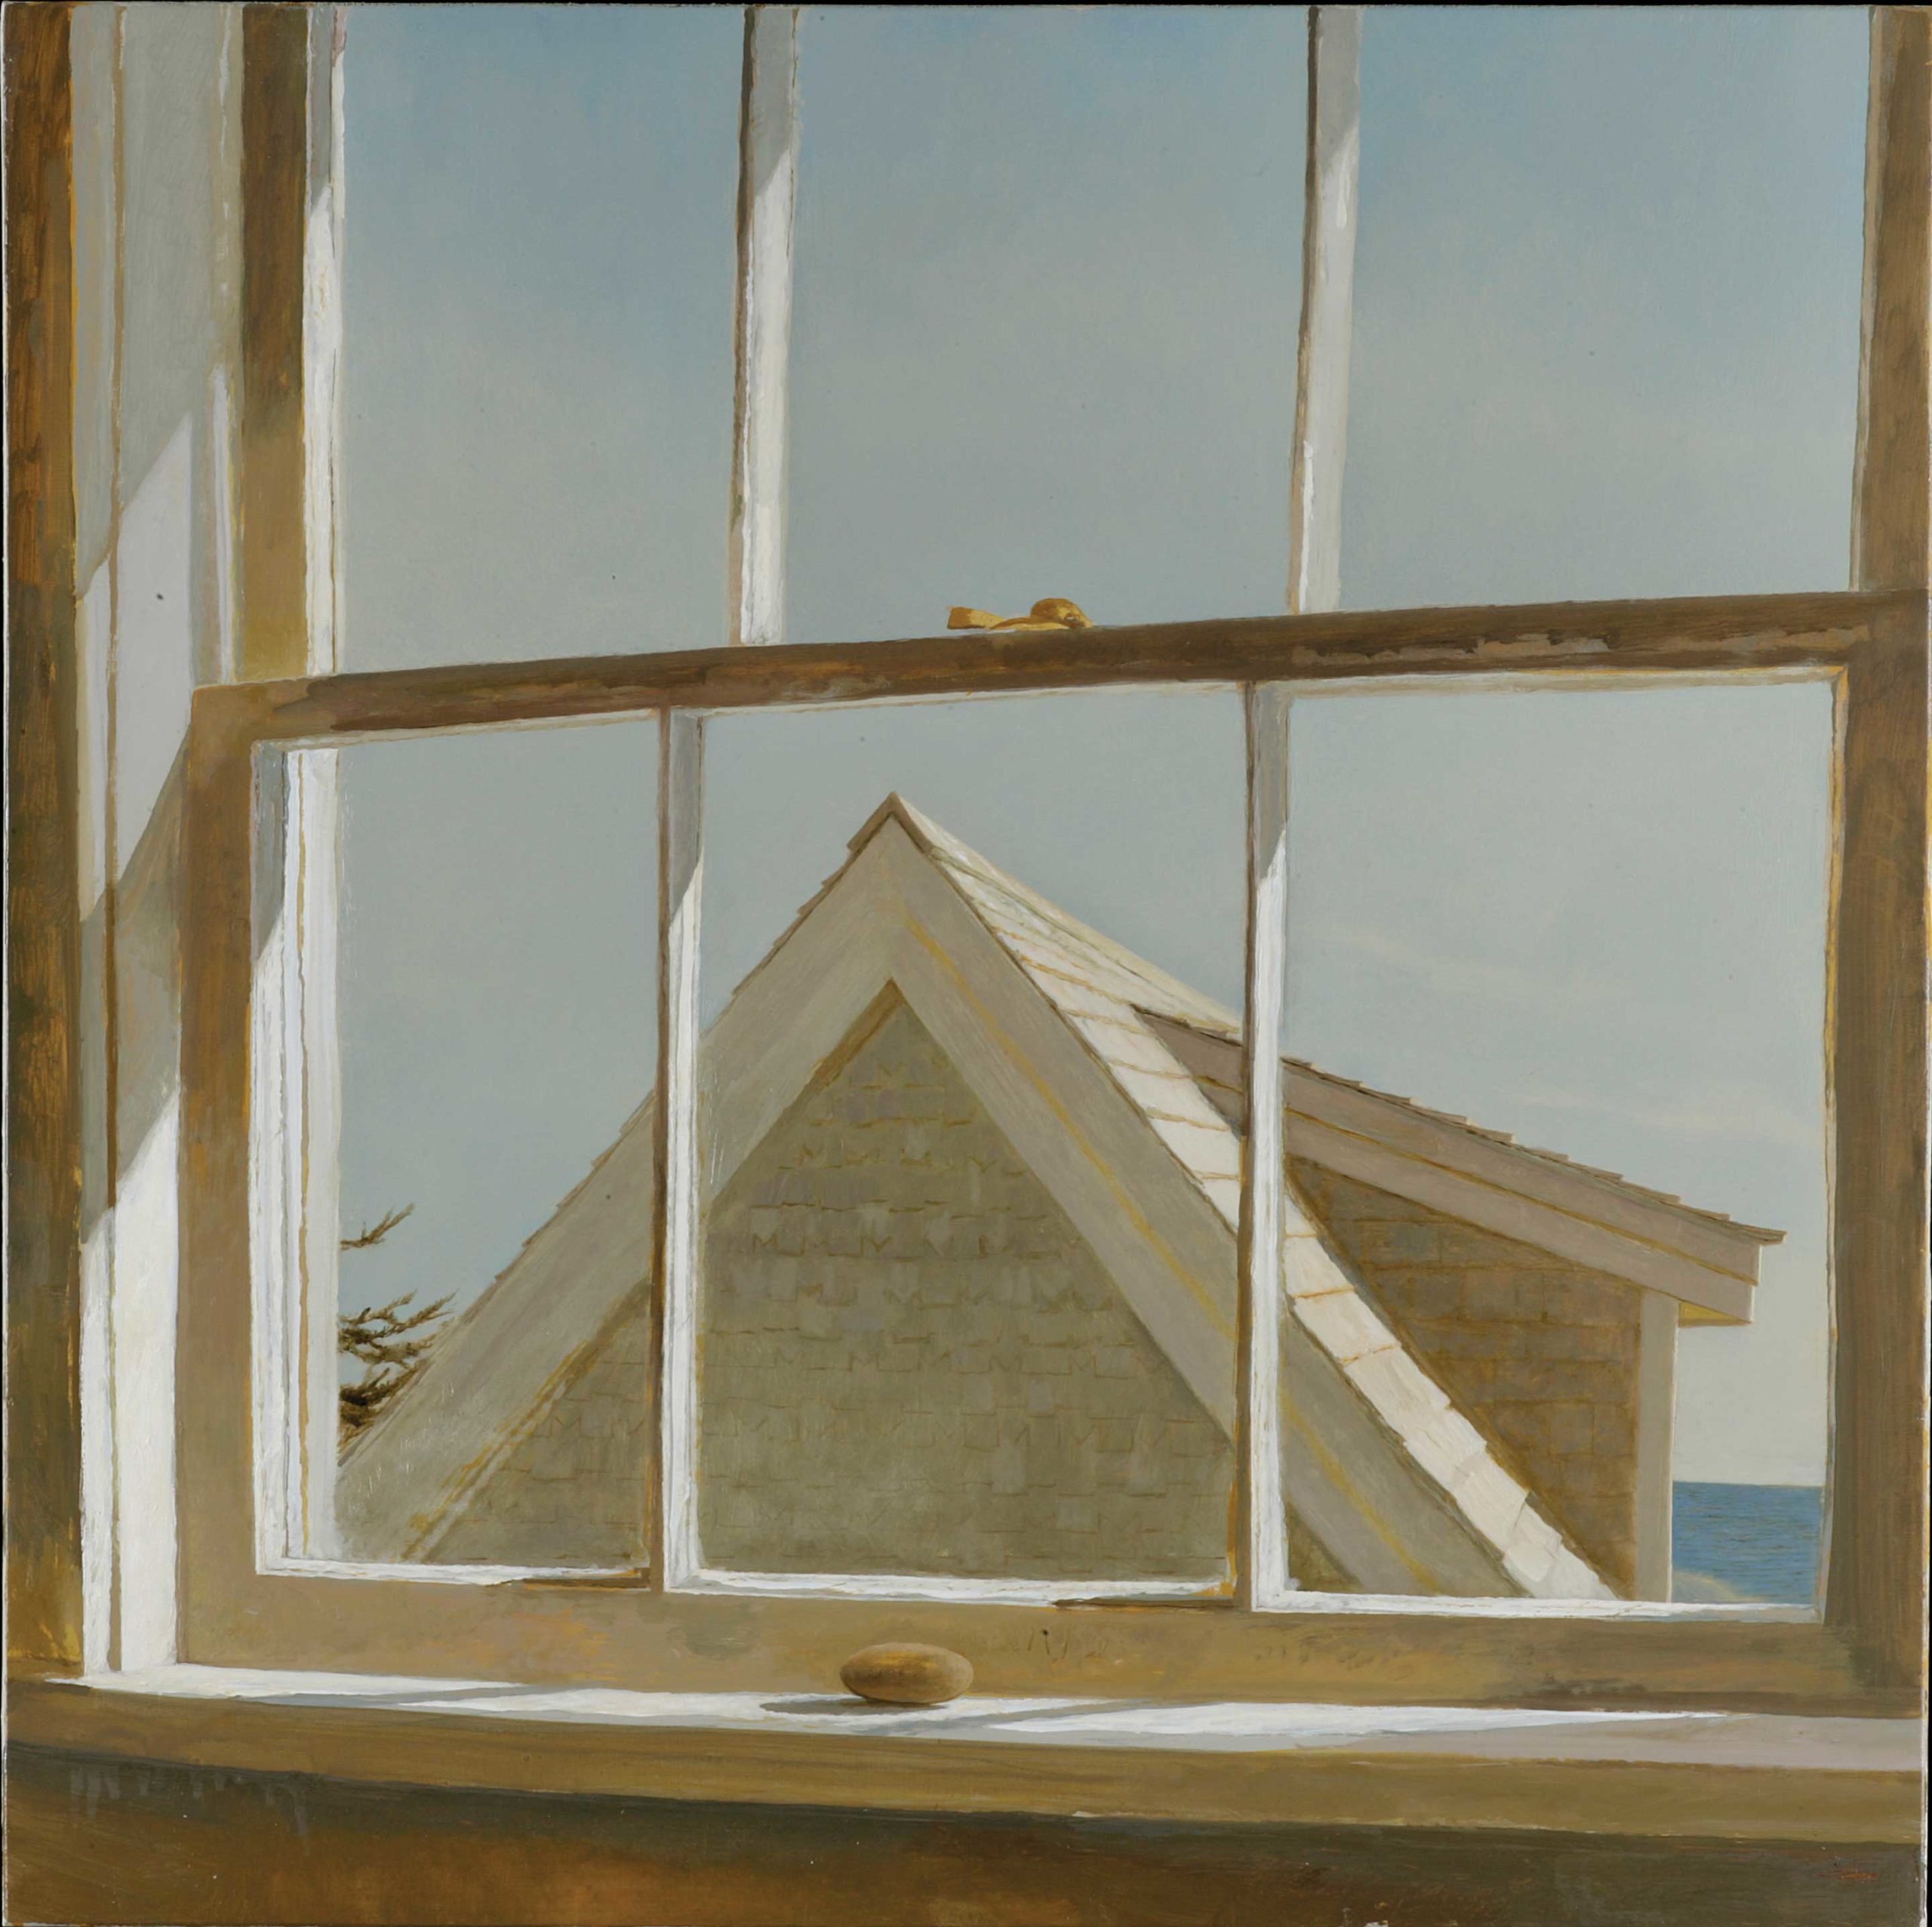 contemporary realism - Bo Bartlett, "The End of Summer," 2006, oil on panel, 24 x 24 in., private collection